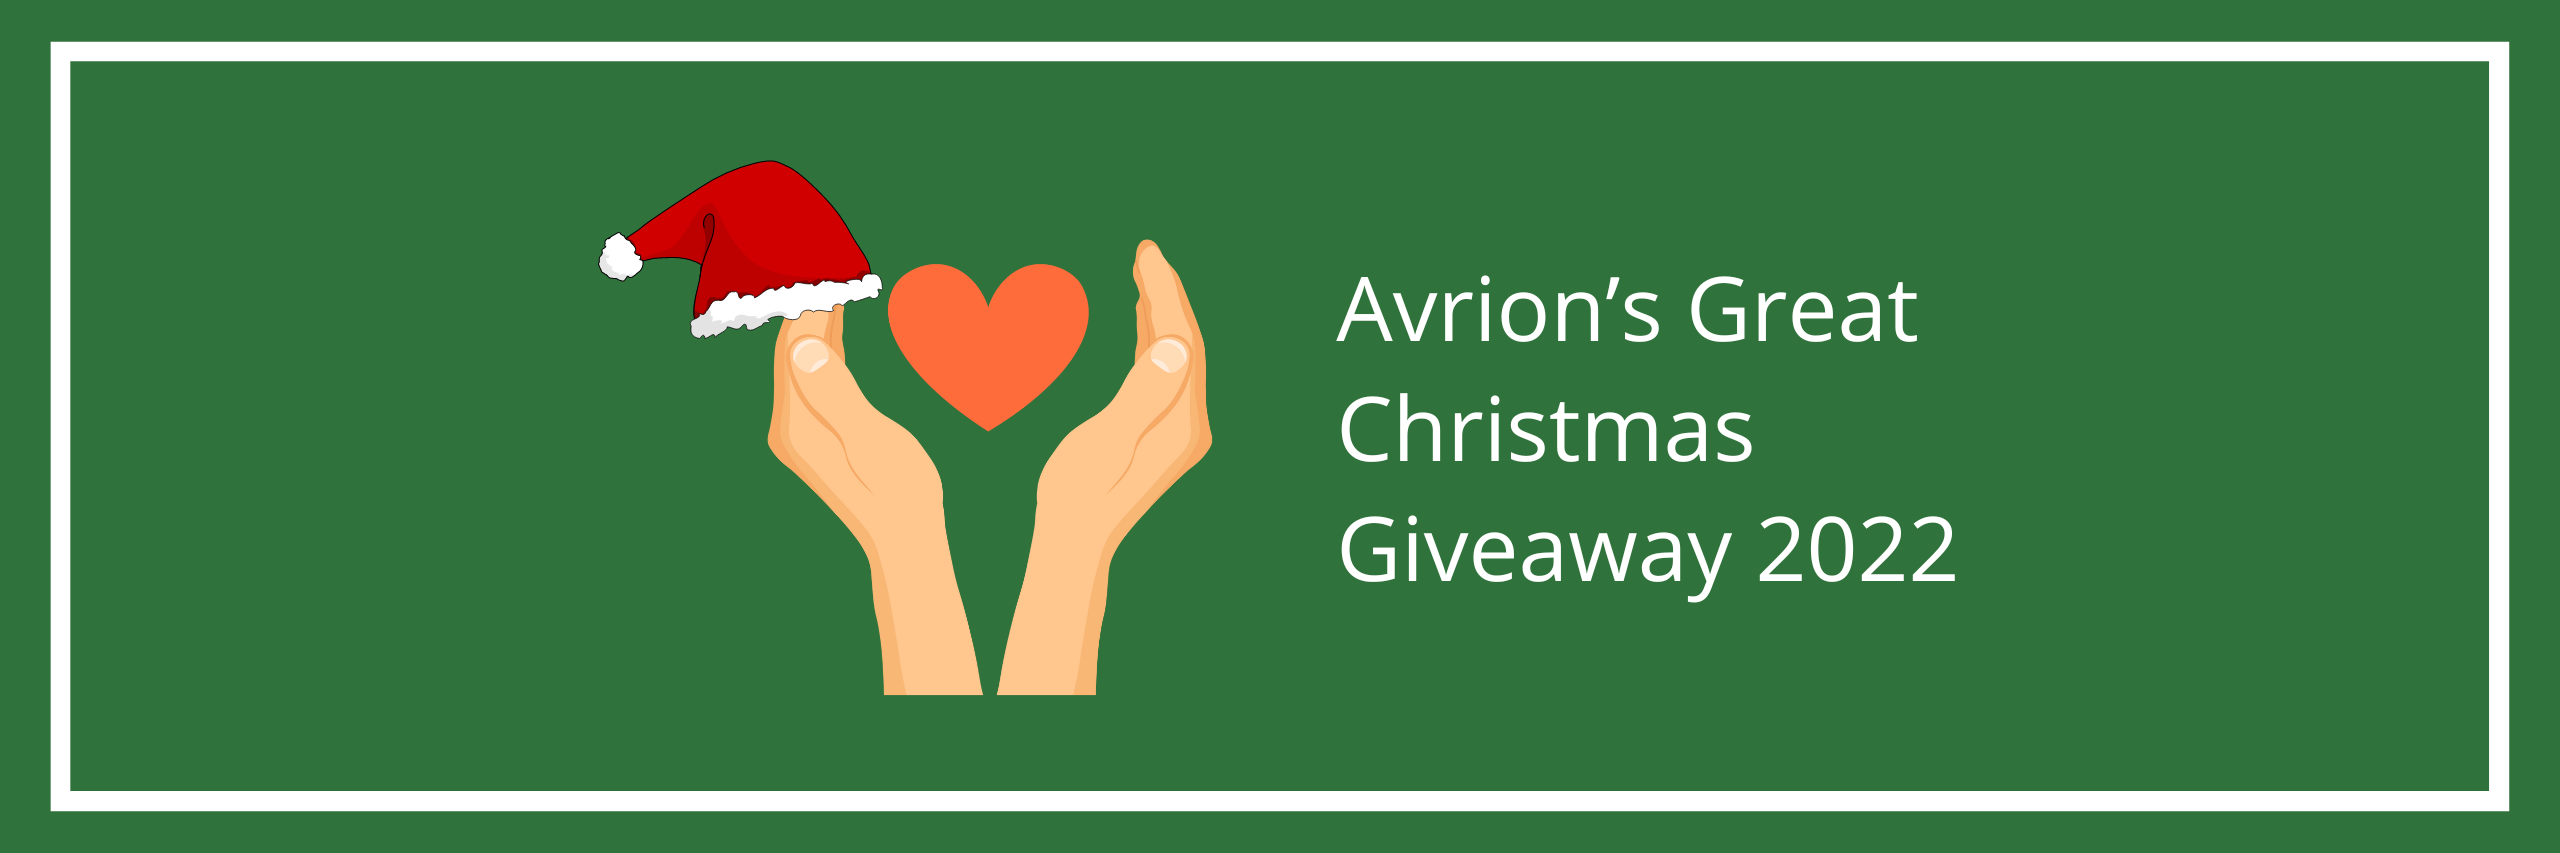 Avrion’s Great Christmas Giveaway 2022